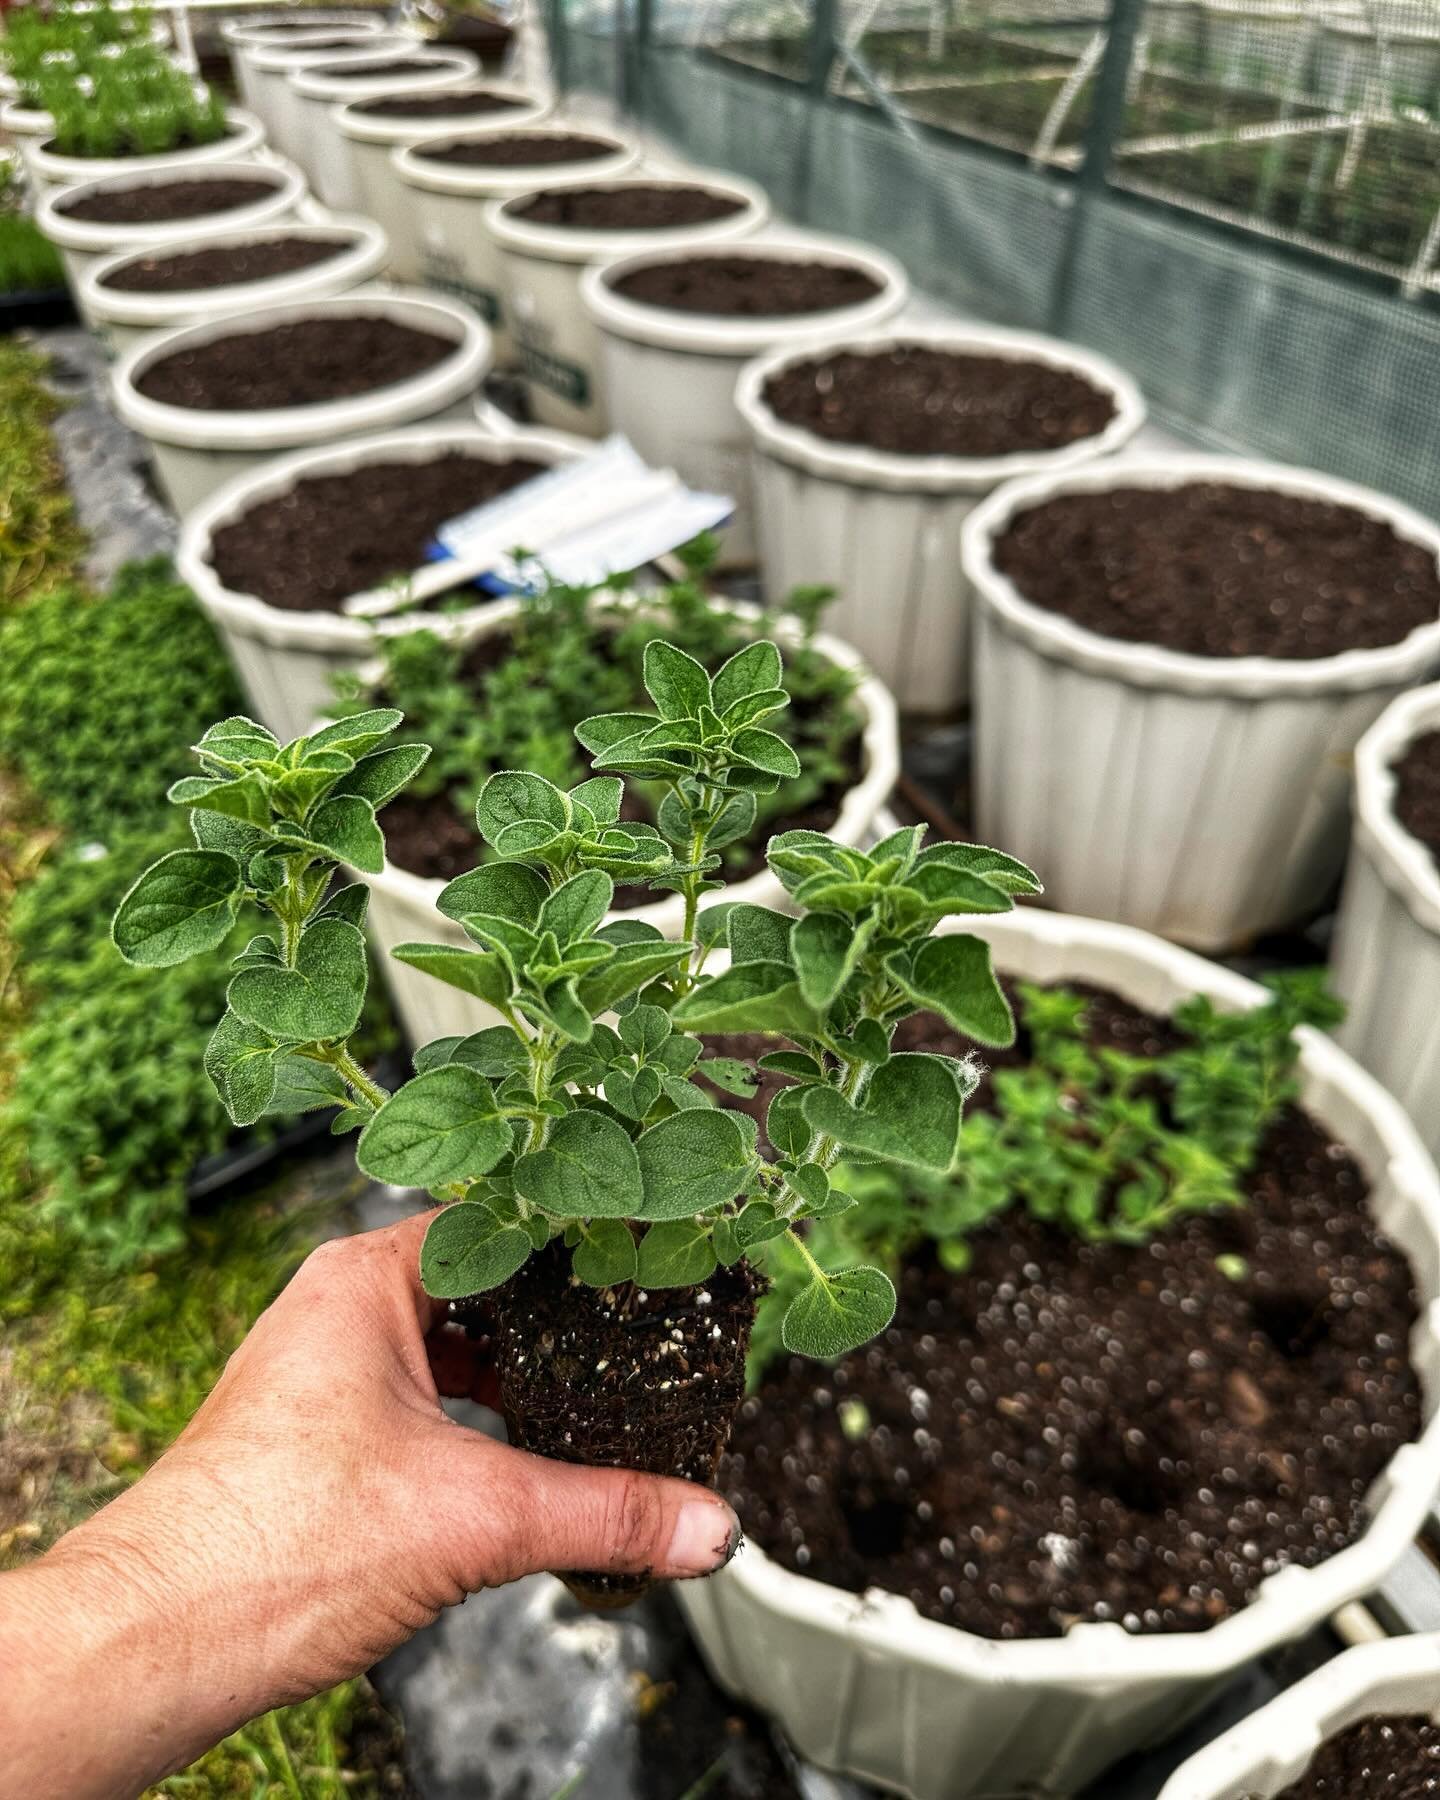 Farm-grown herbs will be available at our booth on Saturday at @oldtownfarmandartmarket, just in time for Earth Day! Here&rsquo;s a list of what we&rsquo;ll have for you to plant in your own garden:

🌎 lemon balm
🌎 mojito mint
🌎 French lavender
🌎